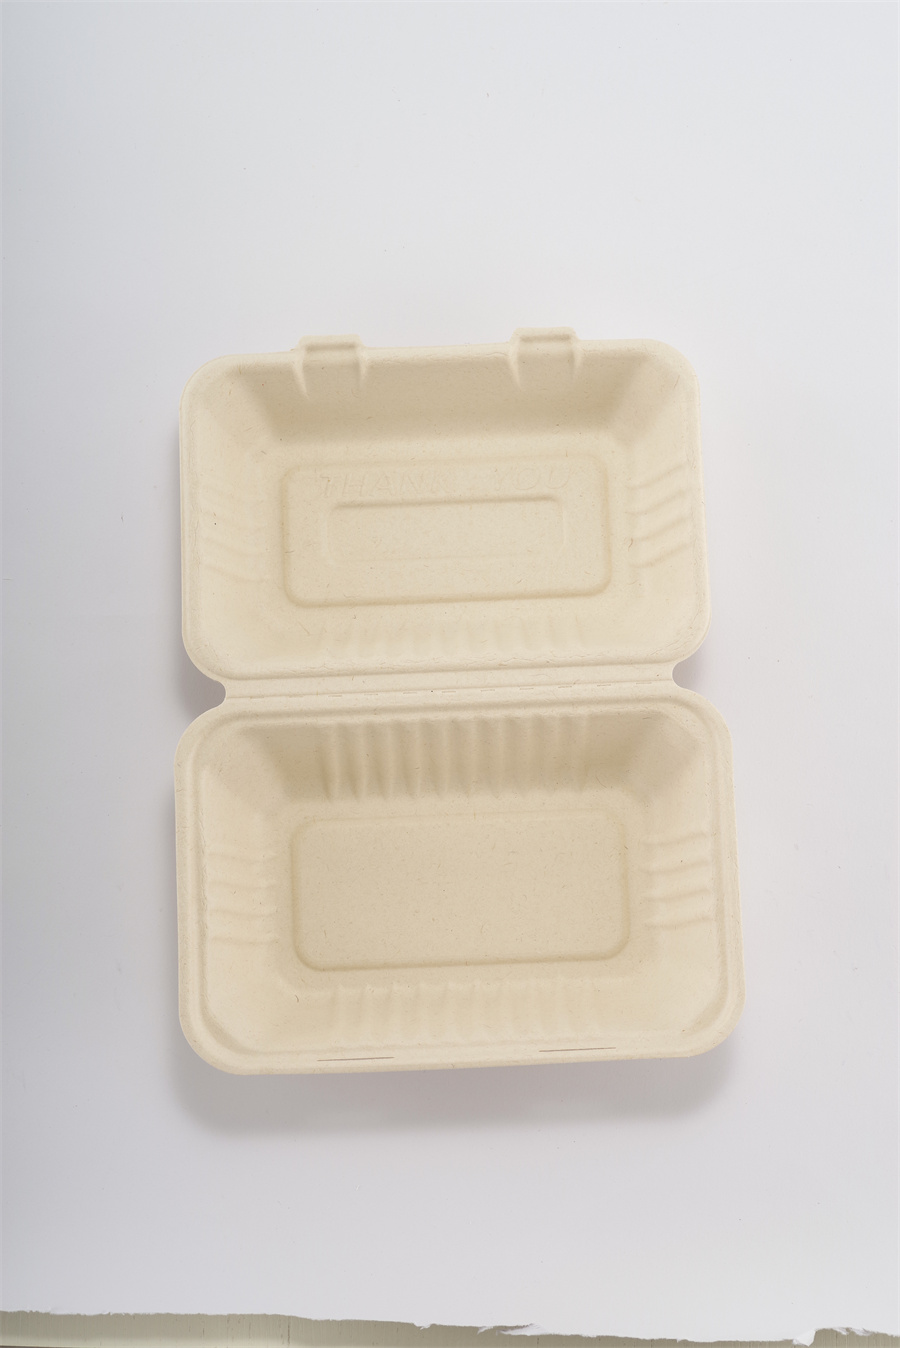 Degradable paper lunch box